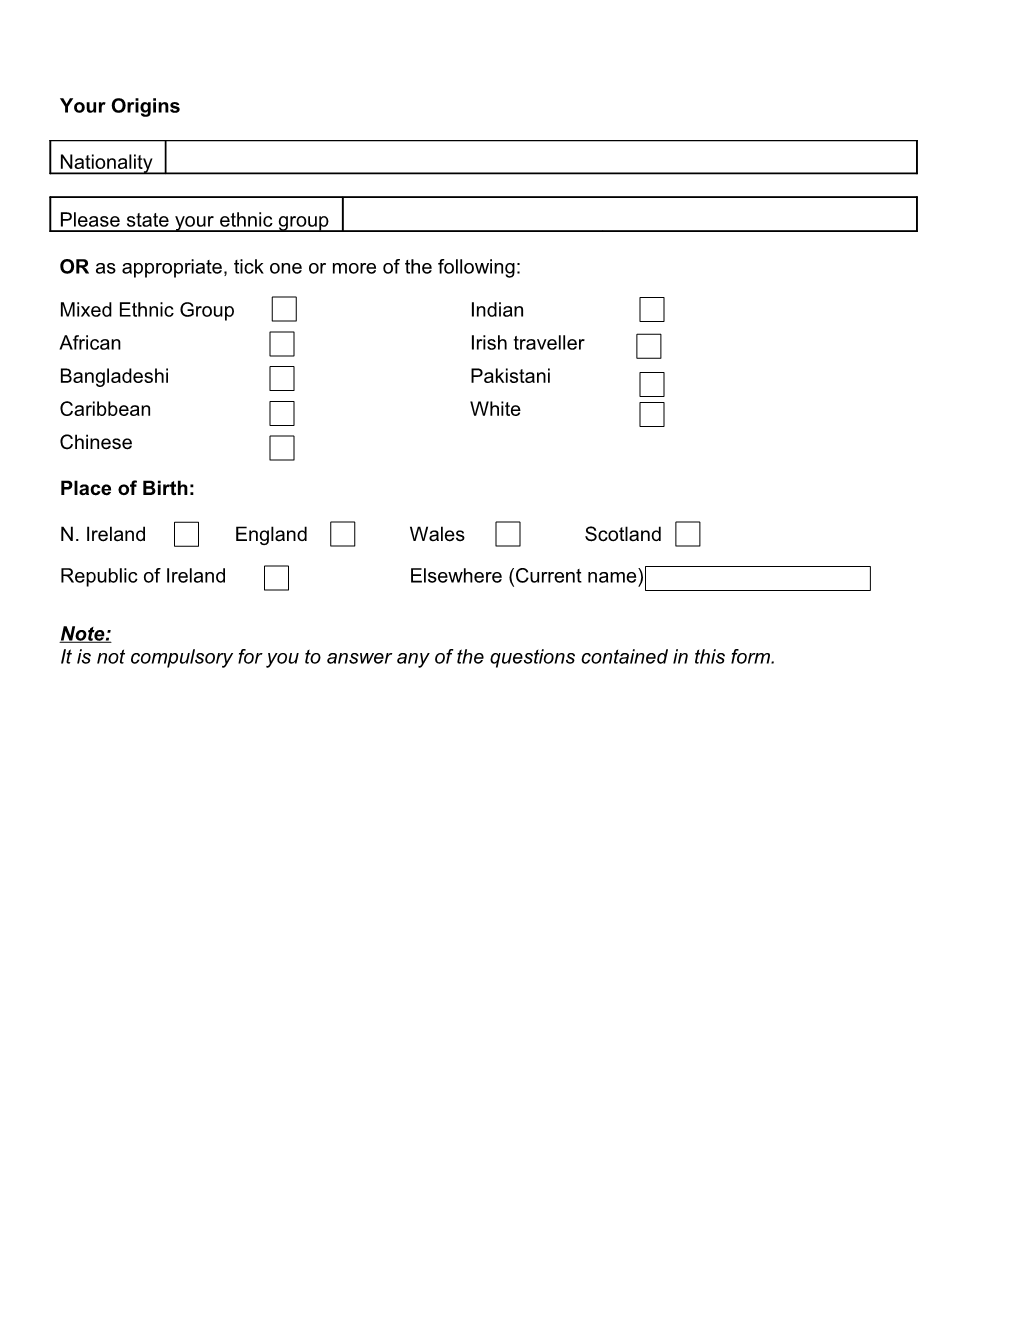 Please Insert This Form in the Monitoring Officer Envelope Provided and Return with Your